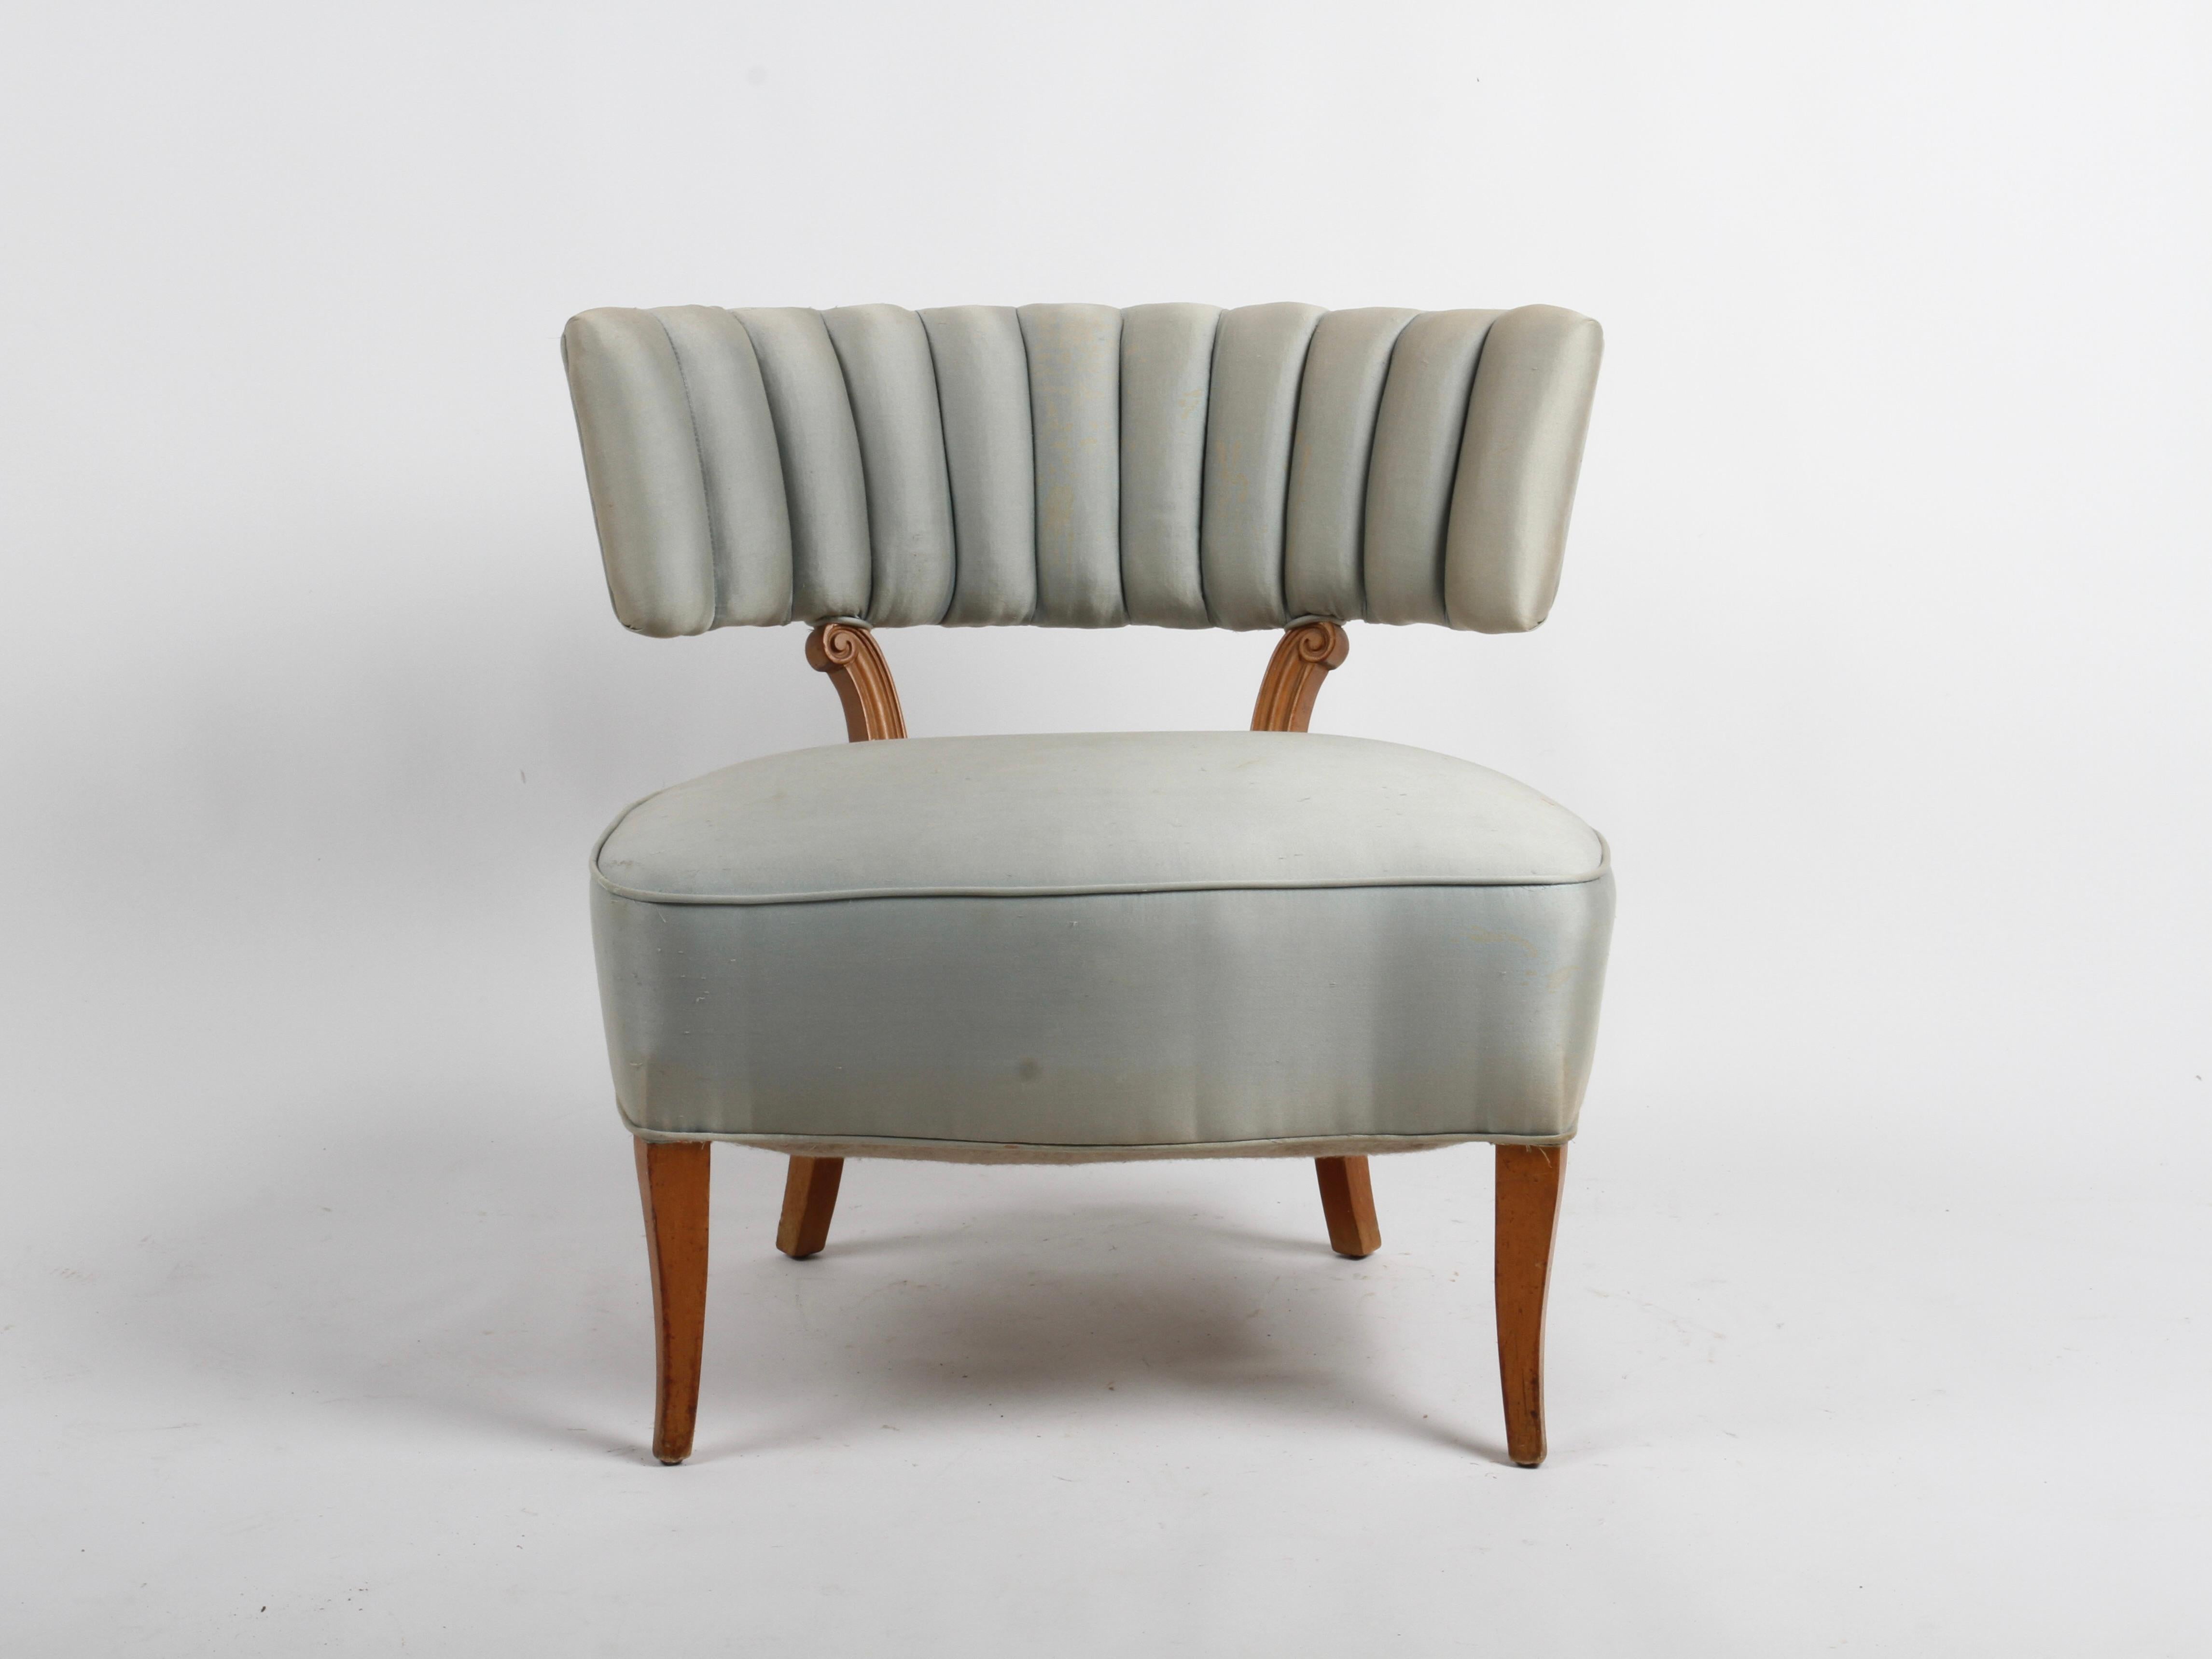 Pair of  1940s high style Lorin Jackson for Grosfeld House wide body slipper chairs with channeled backs on splayed legs. Of the Hollywood Period, these lounge chairs do have neoclassical influences in the carving of the back supports. Wide